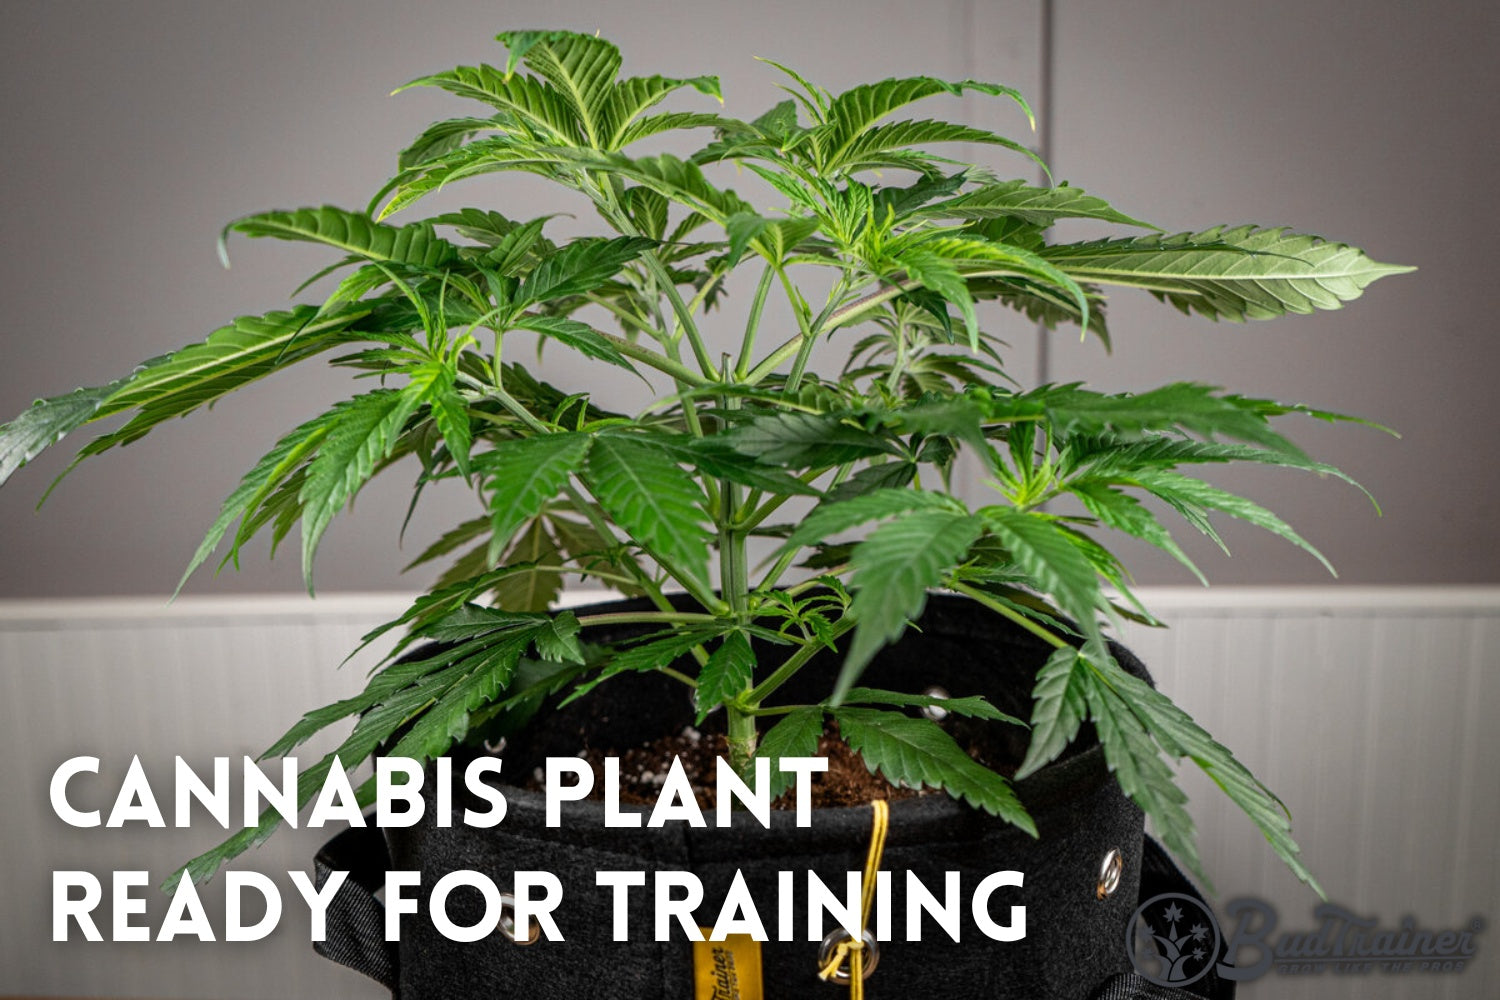 A healthy cannabis plant with lush green leaves growing in a fabric pot, labeled ‘Cannabis Plant Ready for Training,’ with the BudTrainer logo in the bottom right corner.